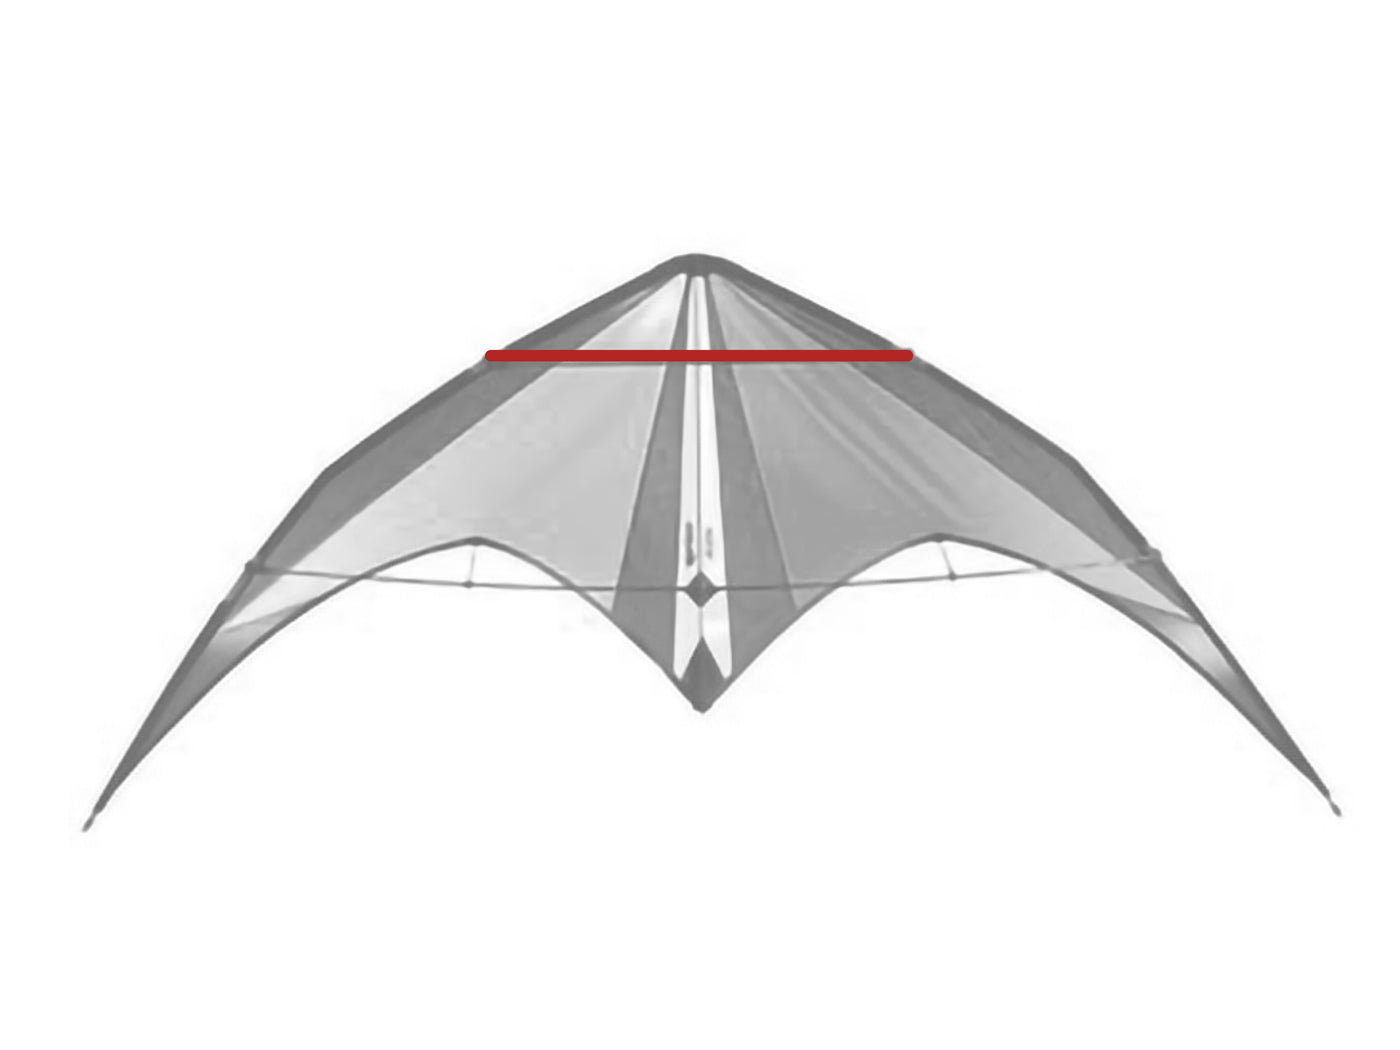 Diagram showing location of the Alien Upper Spreader on the kite.